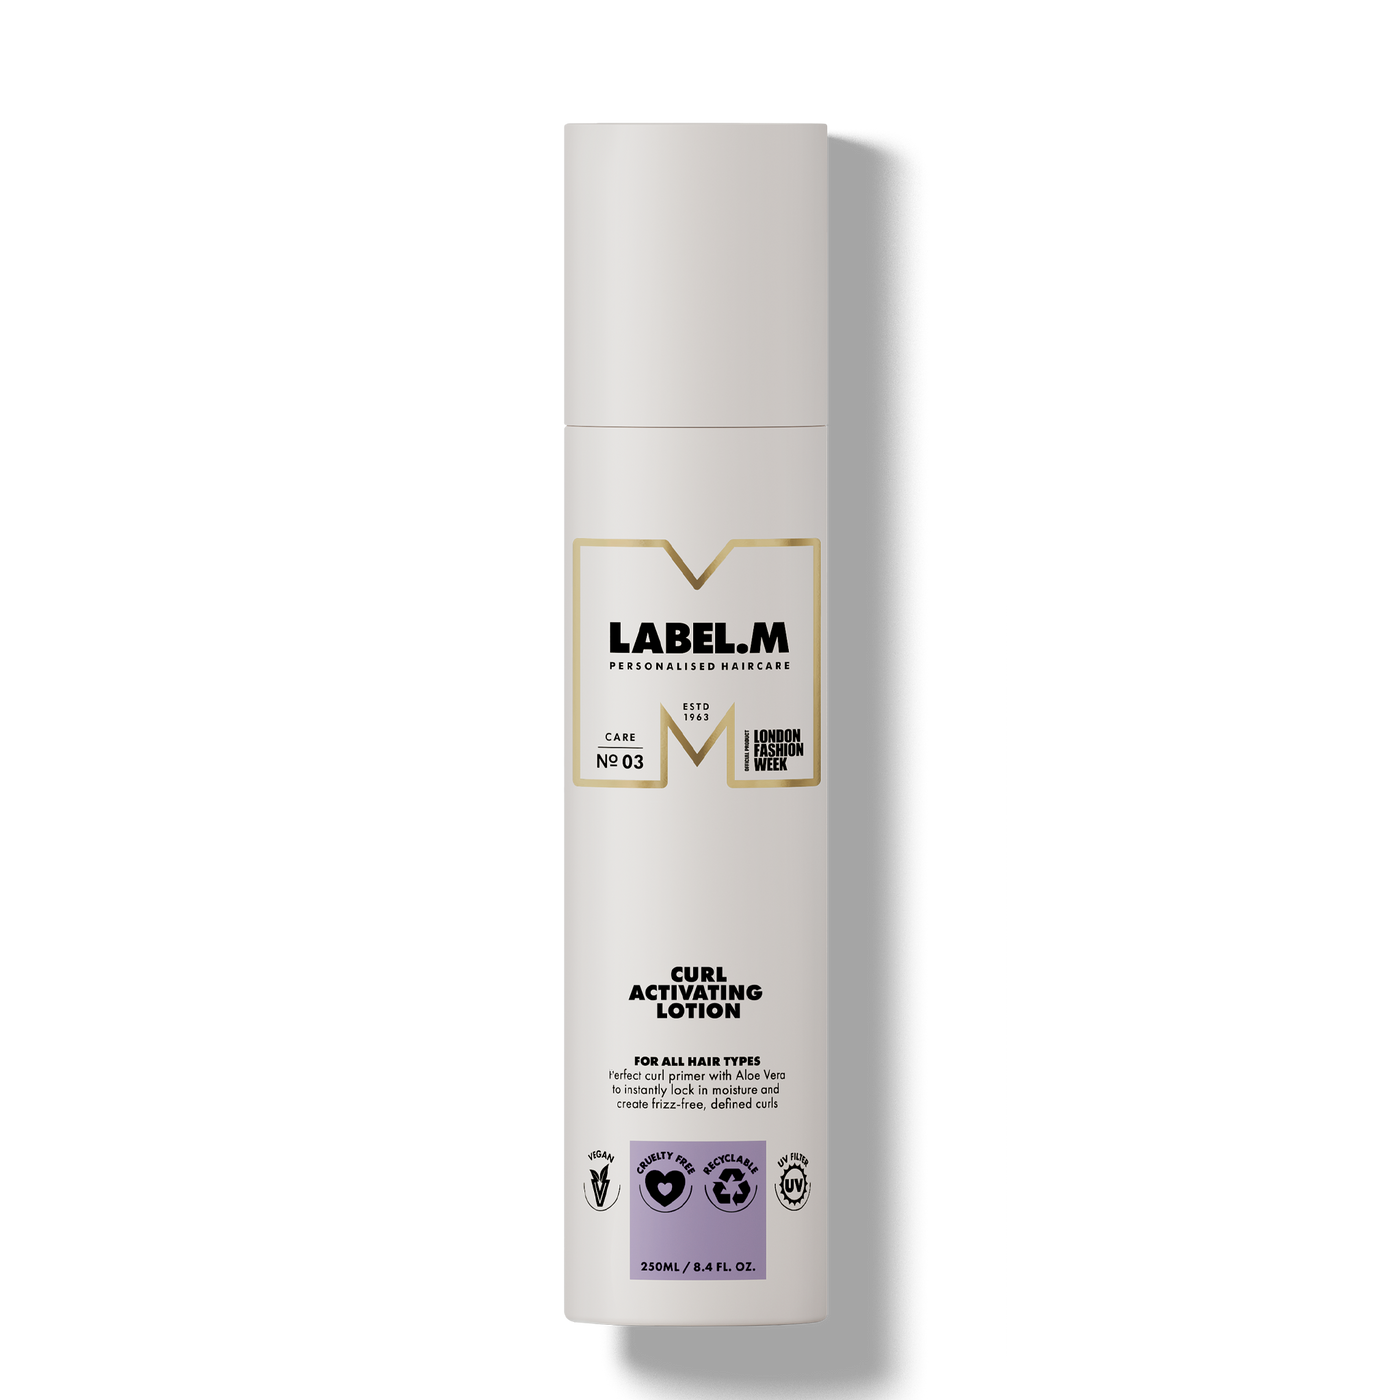 LABEL.M Curl Activating Lotion - 250ml